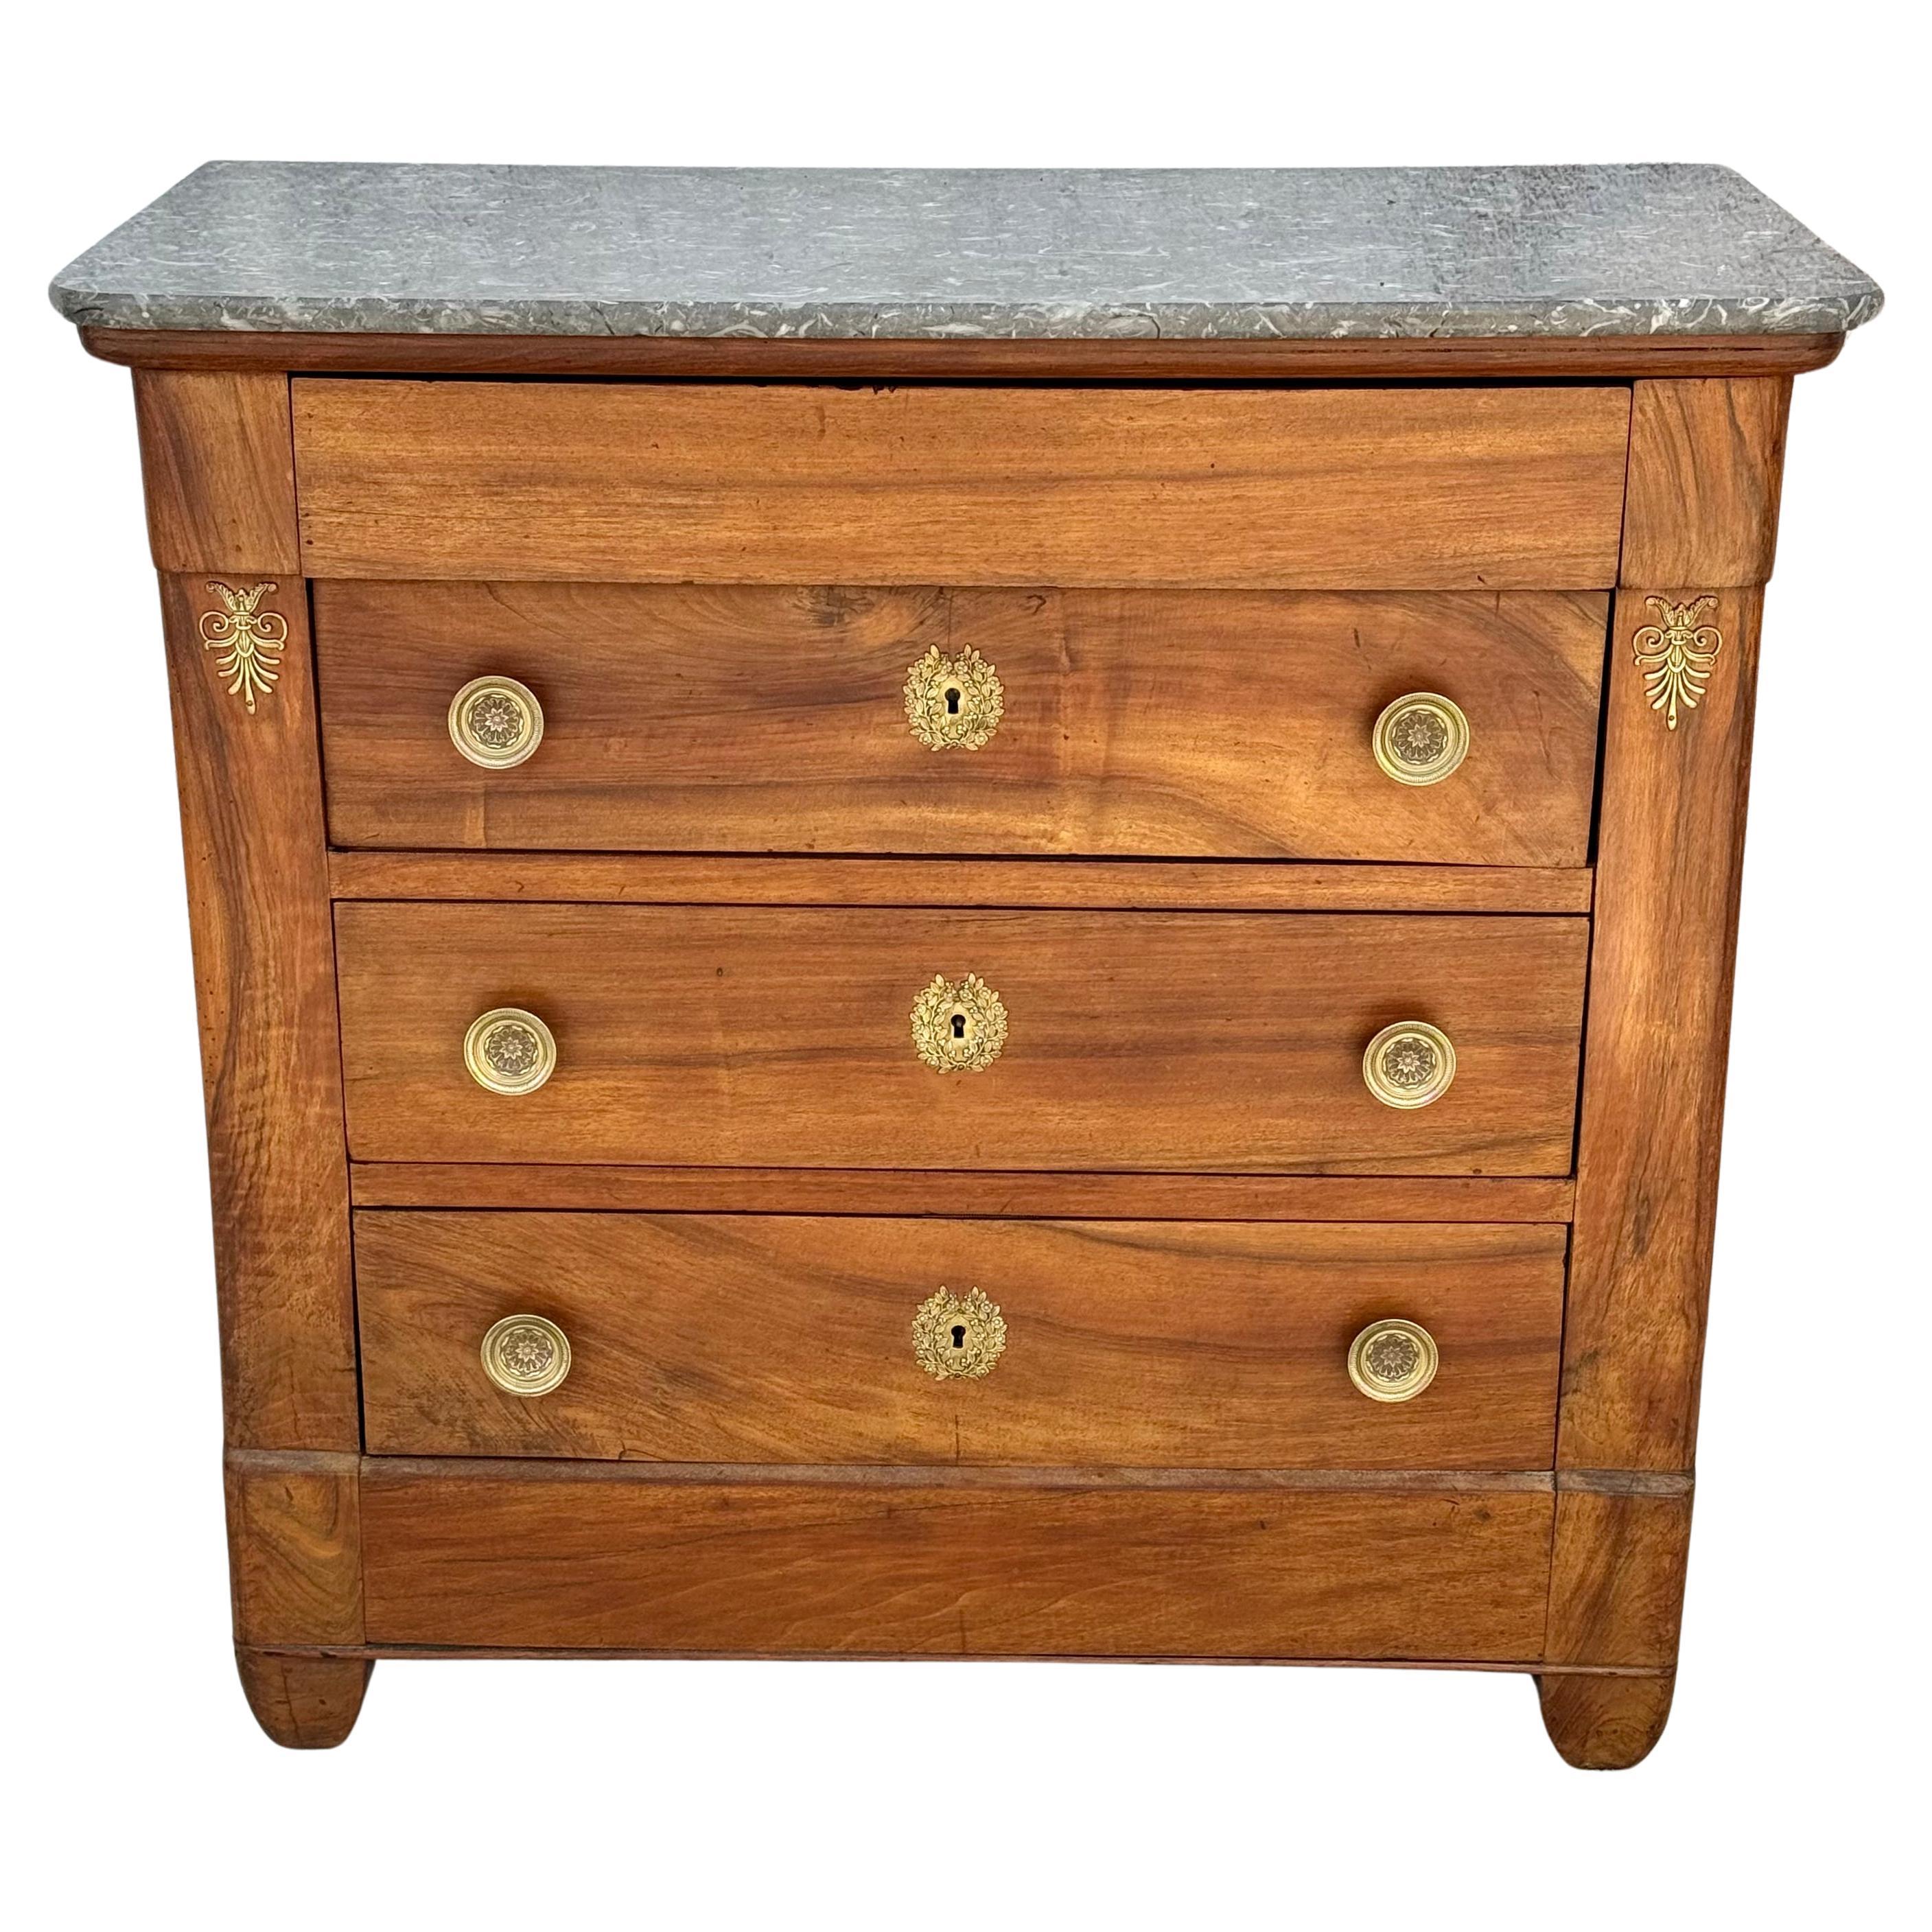 French Empire Ormolu Mounted Marble Top Walnut Commode For Sale